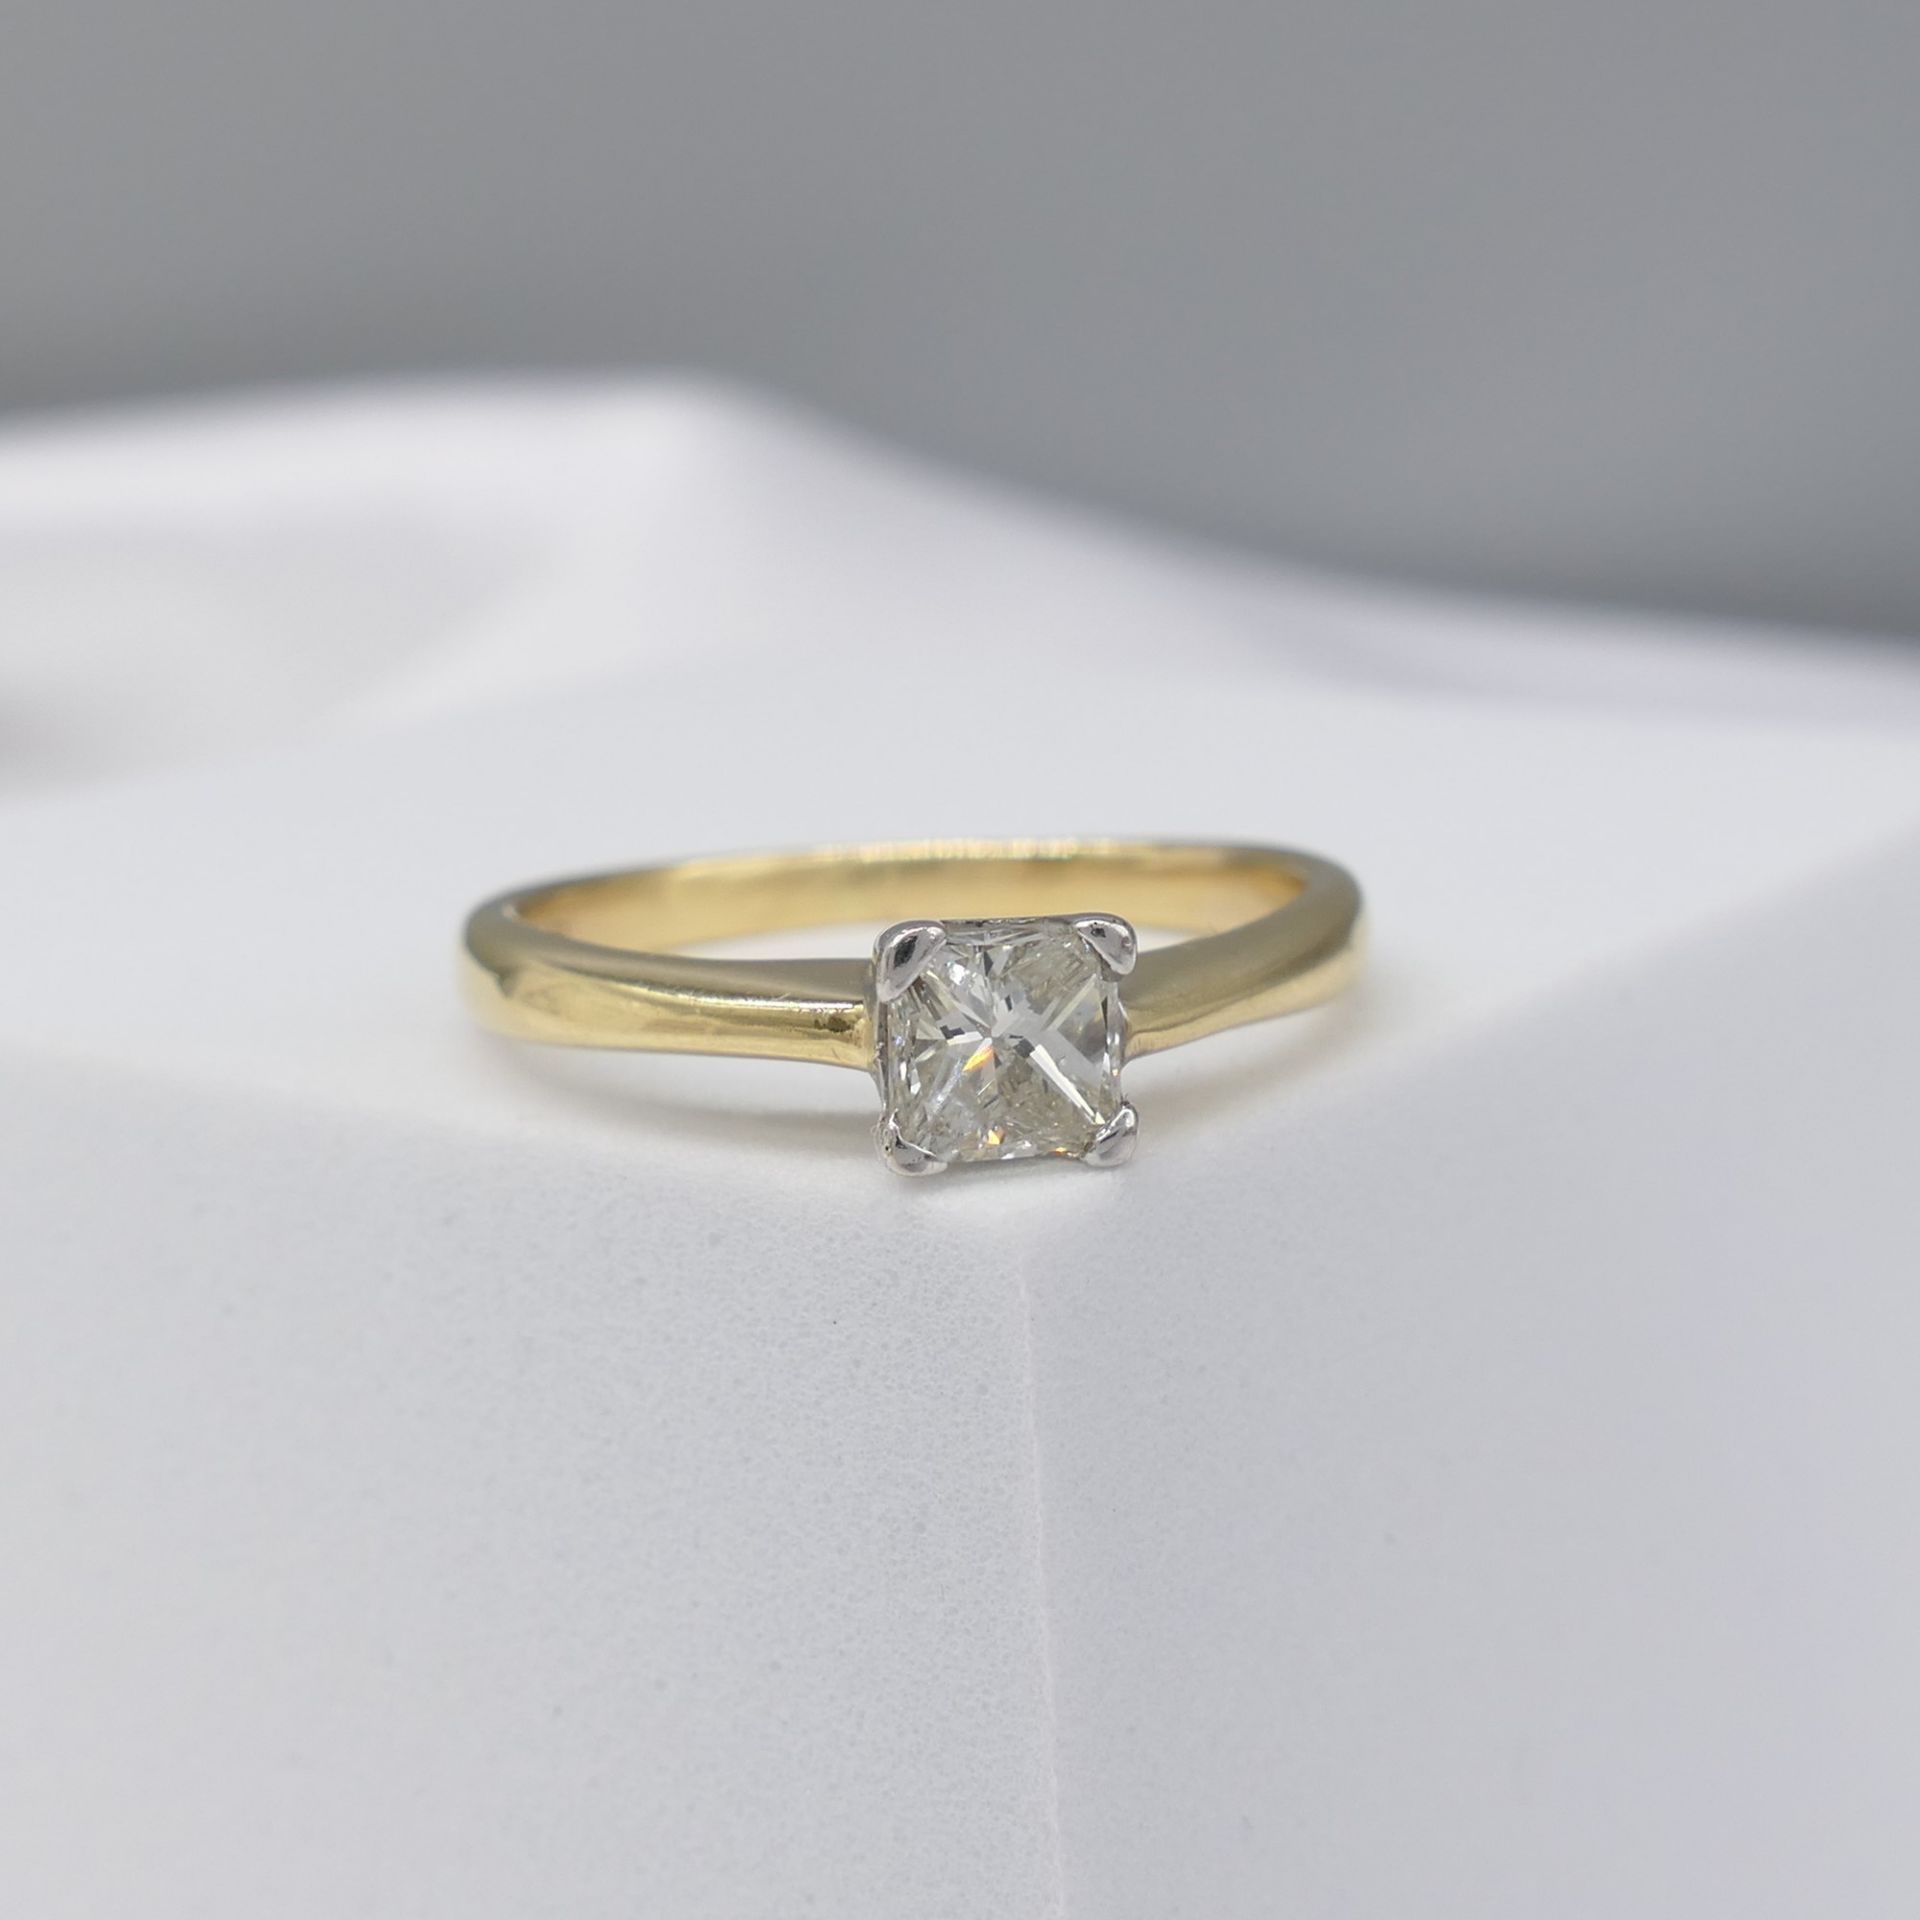 Square princess-cut 0.52 carat diamond solitaire ring in 18ct gold, with report - Image 7 of 7